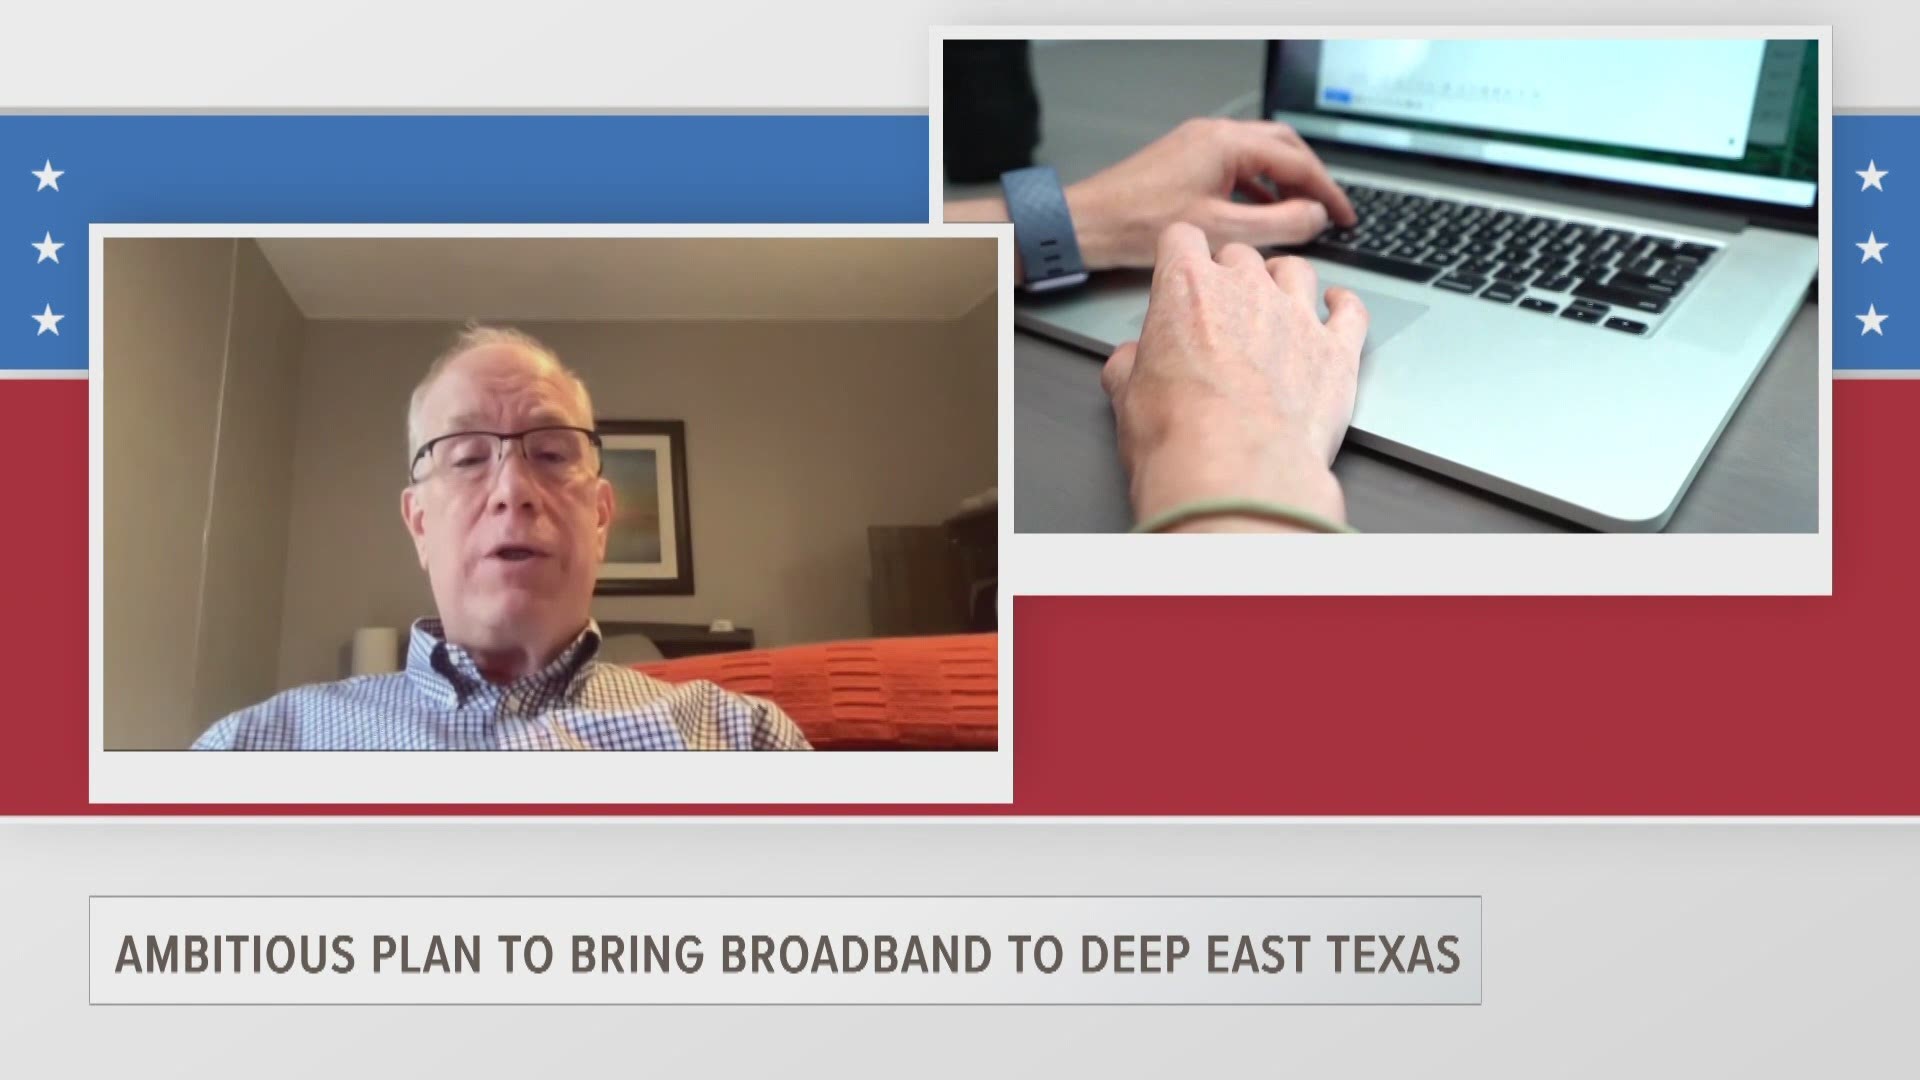 The executive director of the Deep East Texas Council of Governments discusses its bold plan to bring low-cost, high-speed internet access to the entire region